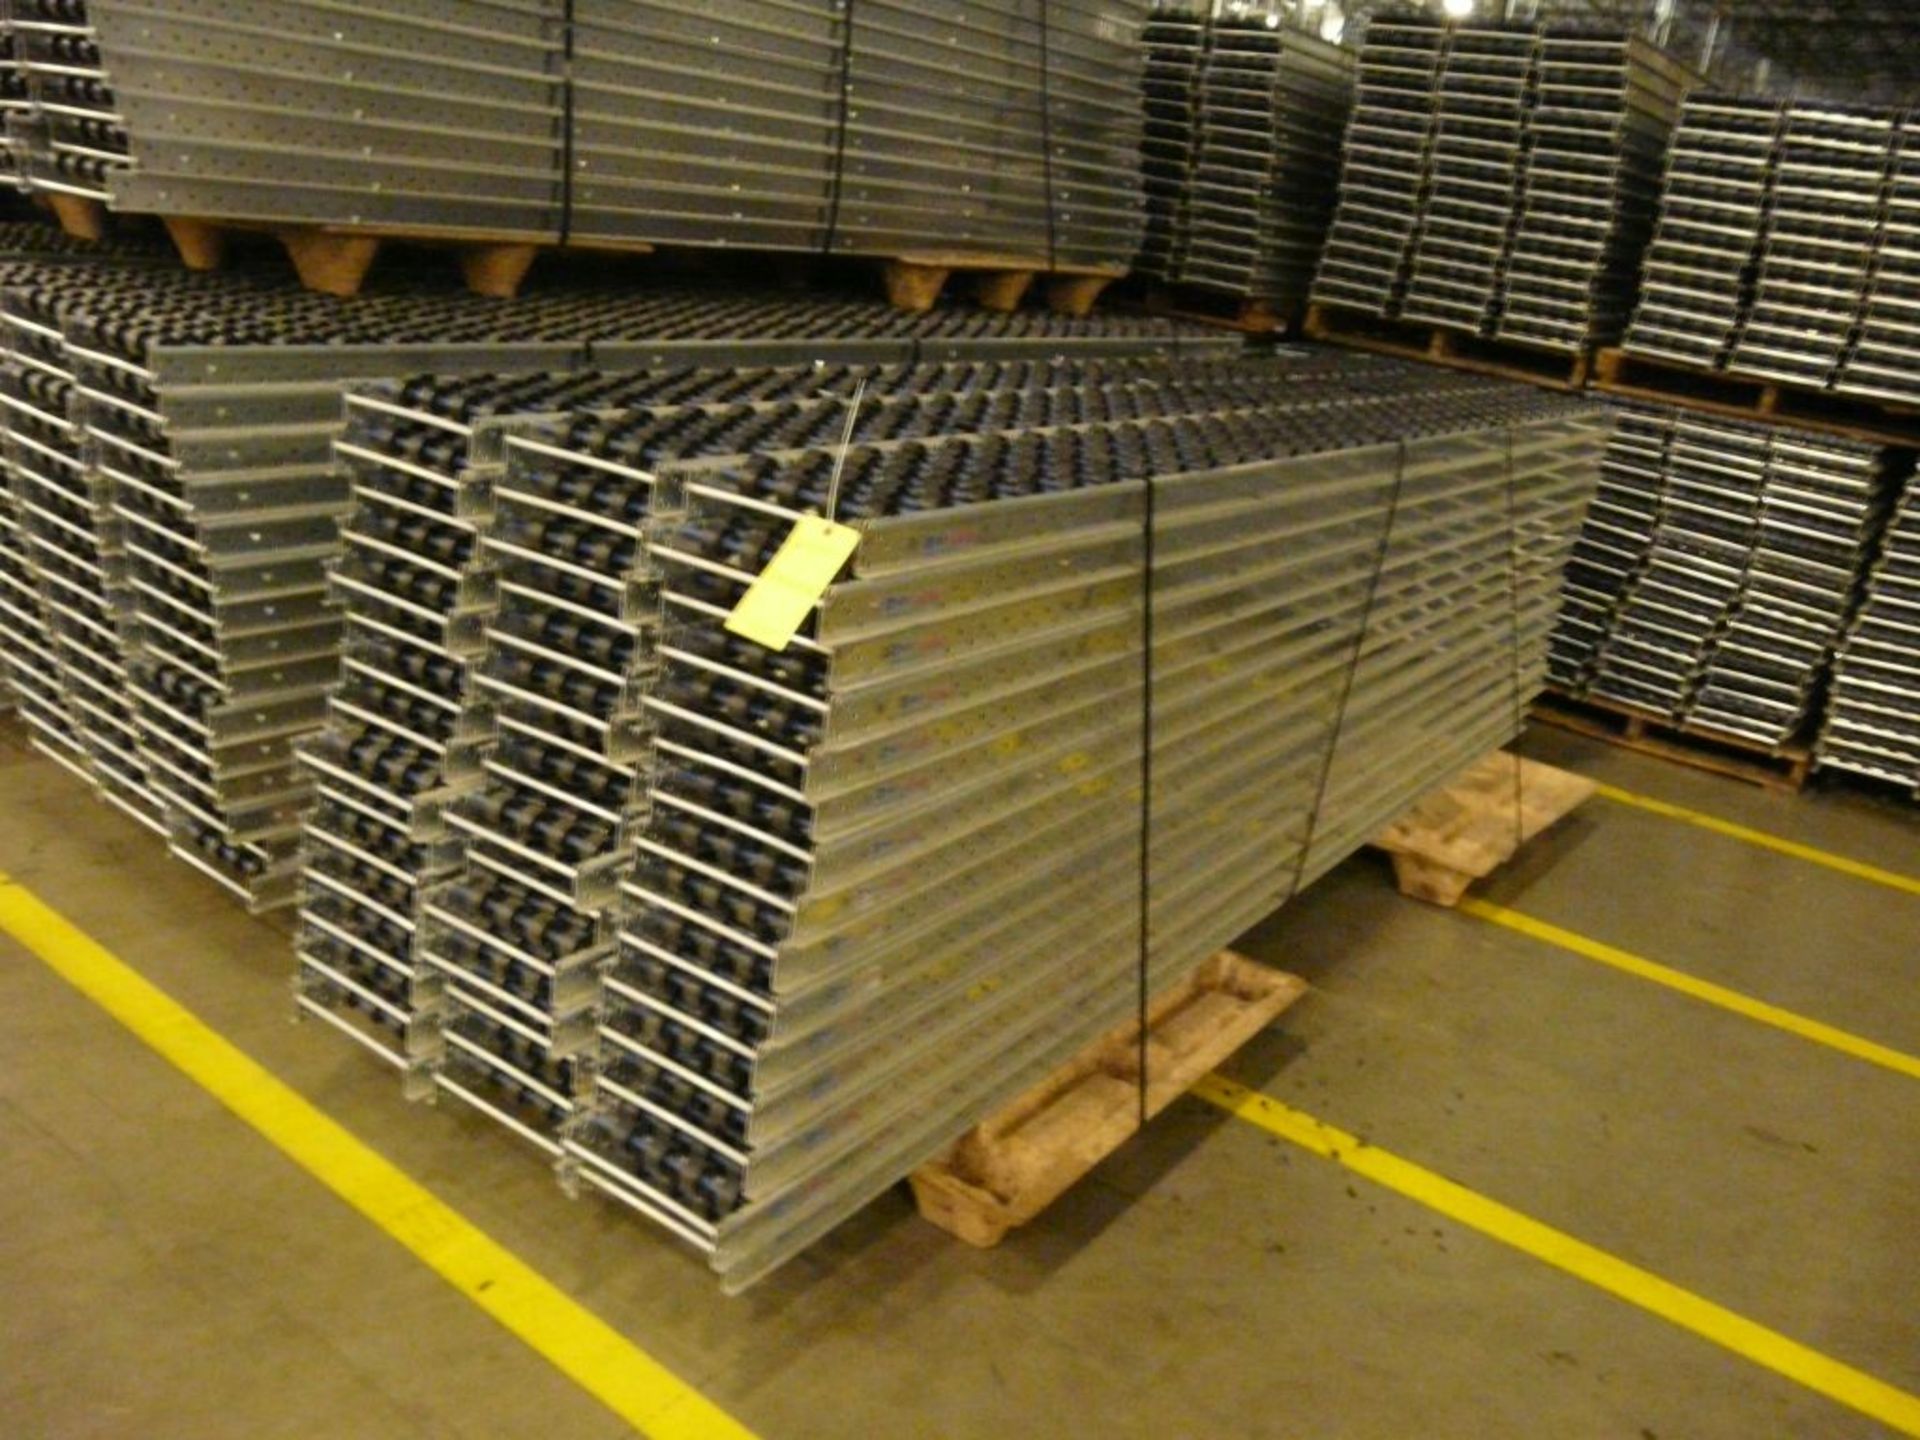 Lot of (90) SpanTrack Wheelbed Carton Flow Conveyors - 11.5'L x 11"W; Tag: 223603 - $30 Lot